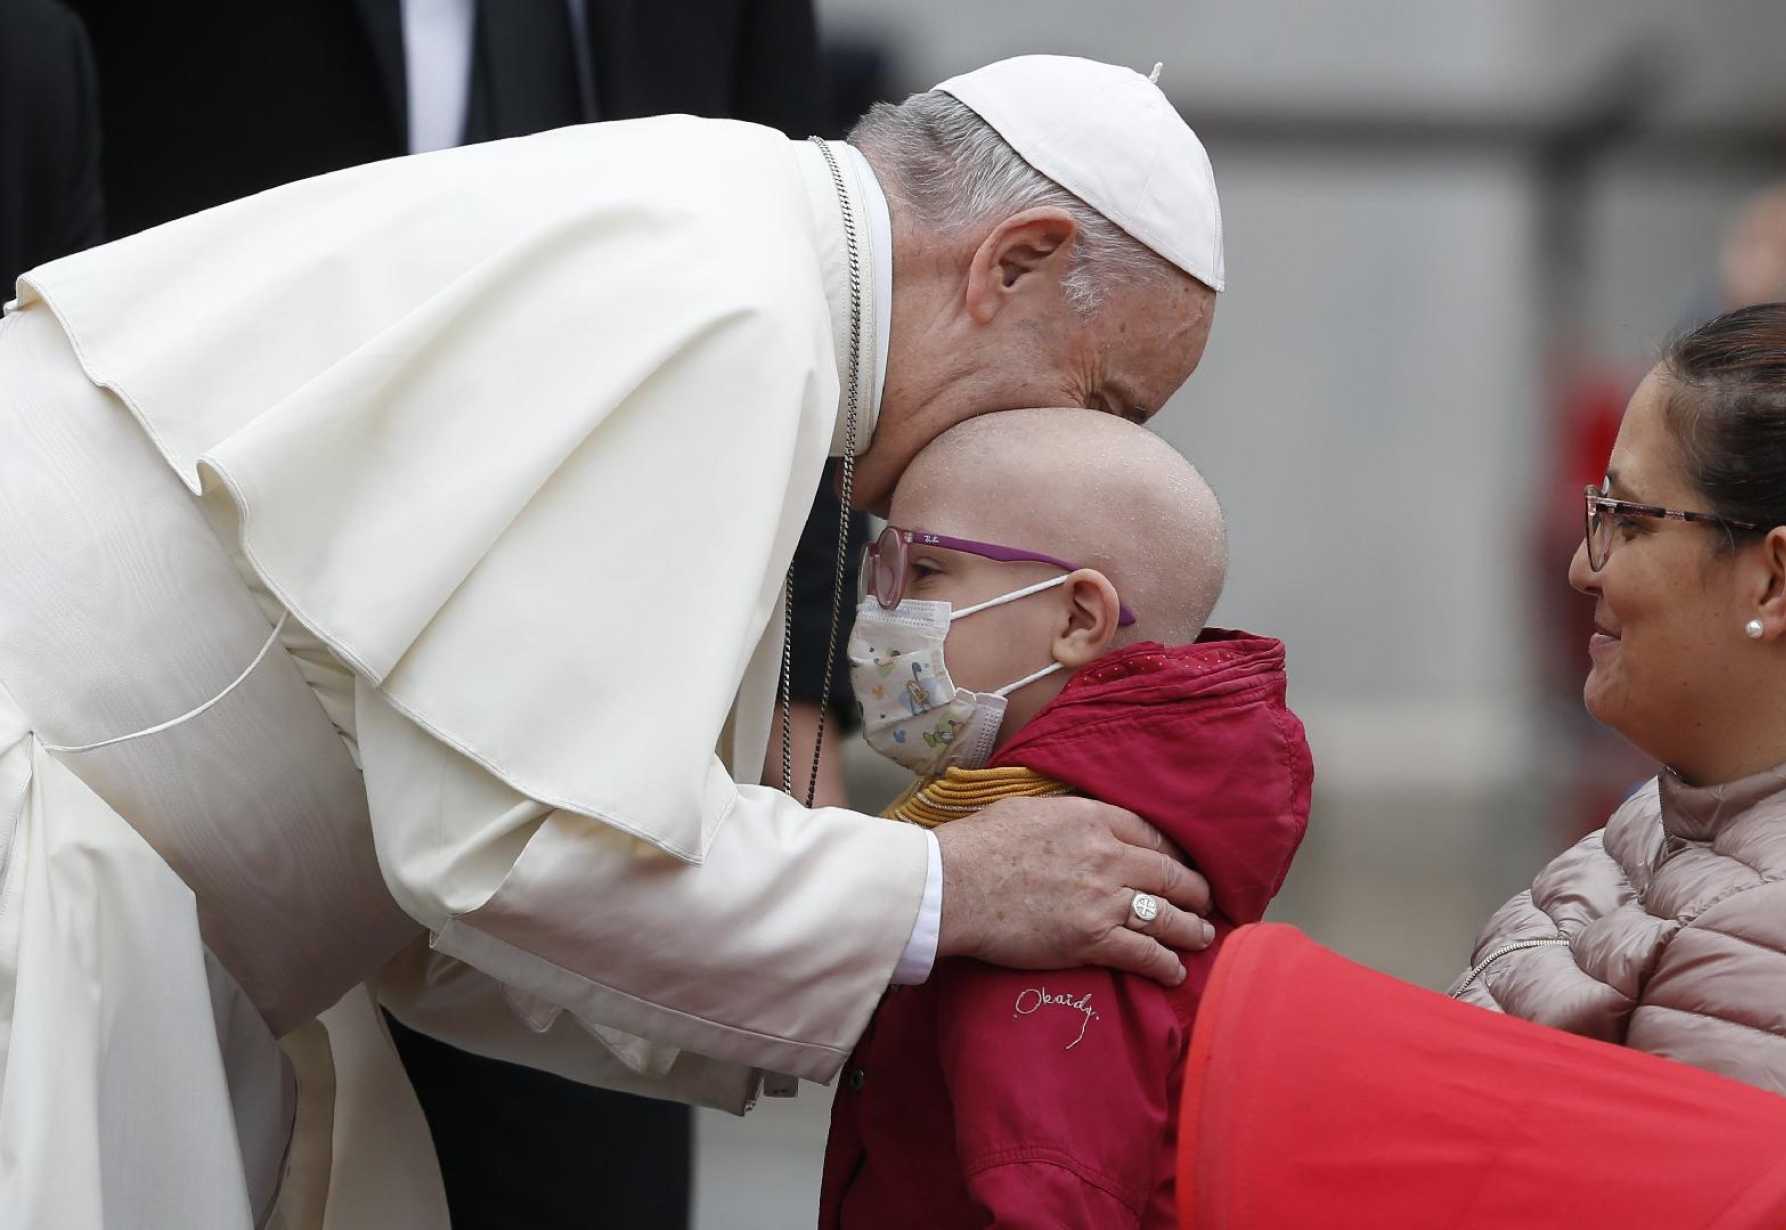 The sick, and the world, need 'therapy' of love, pope says in message